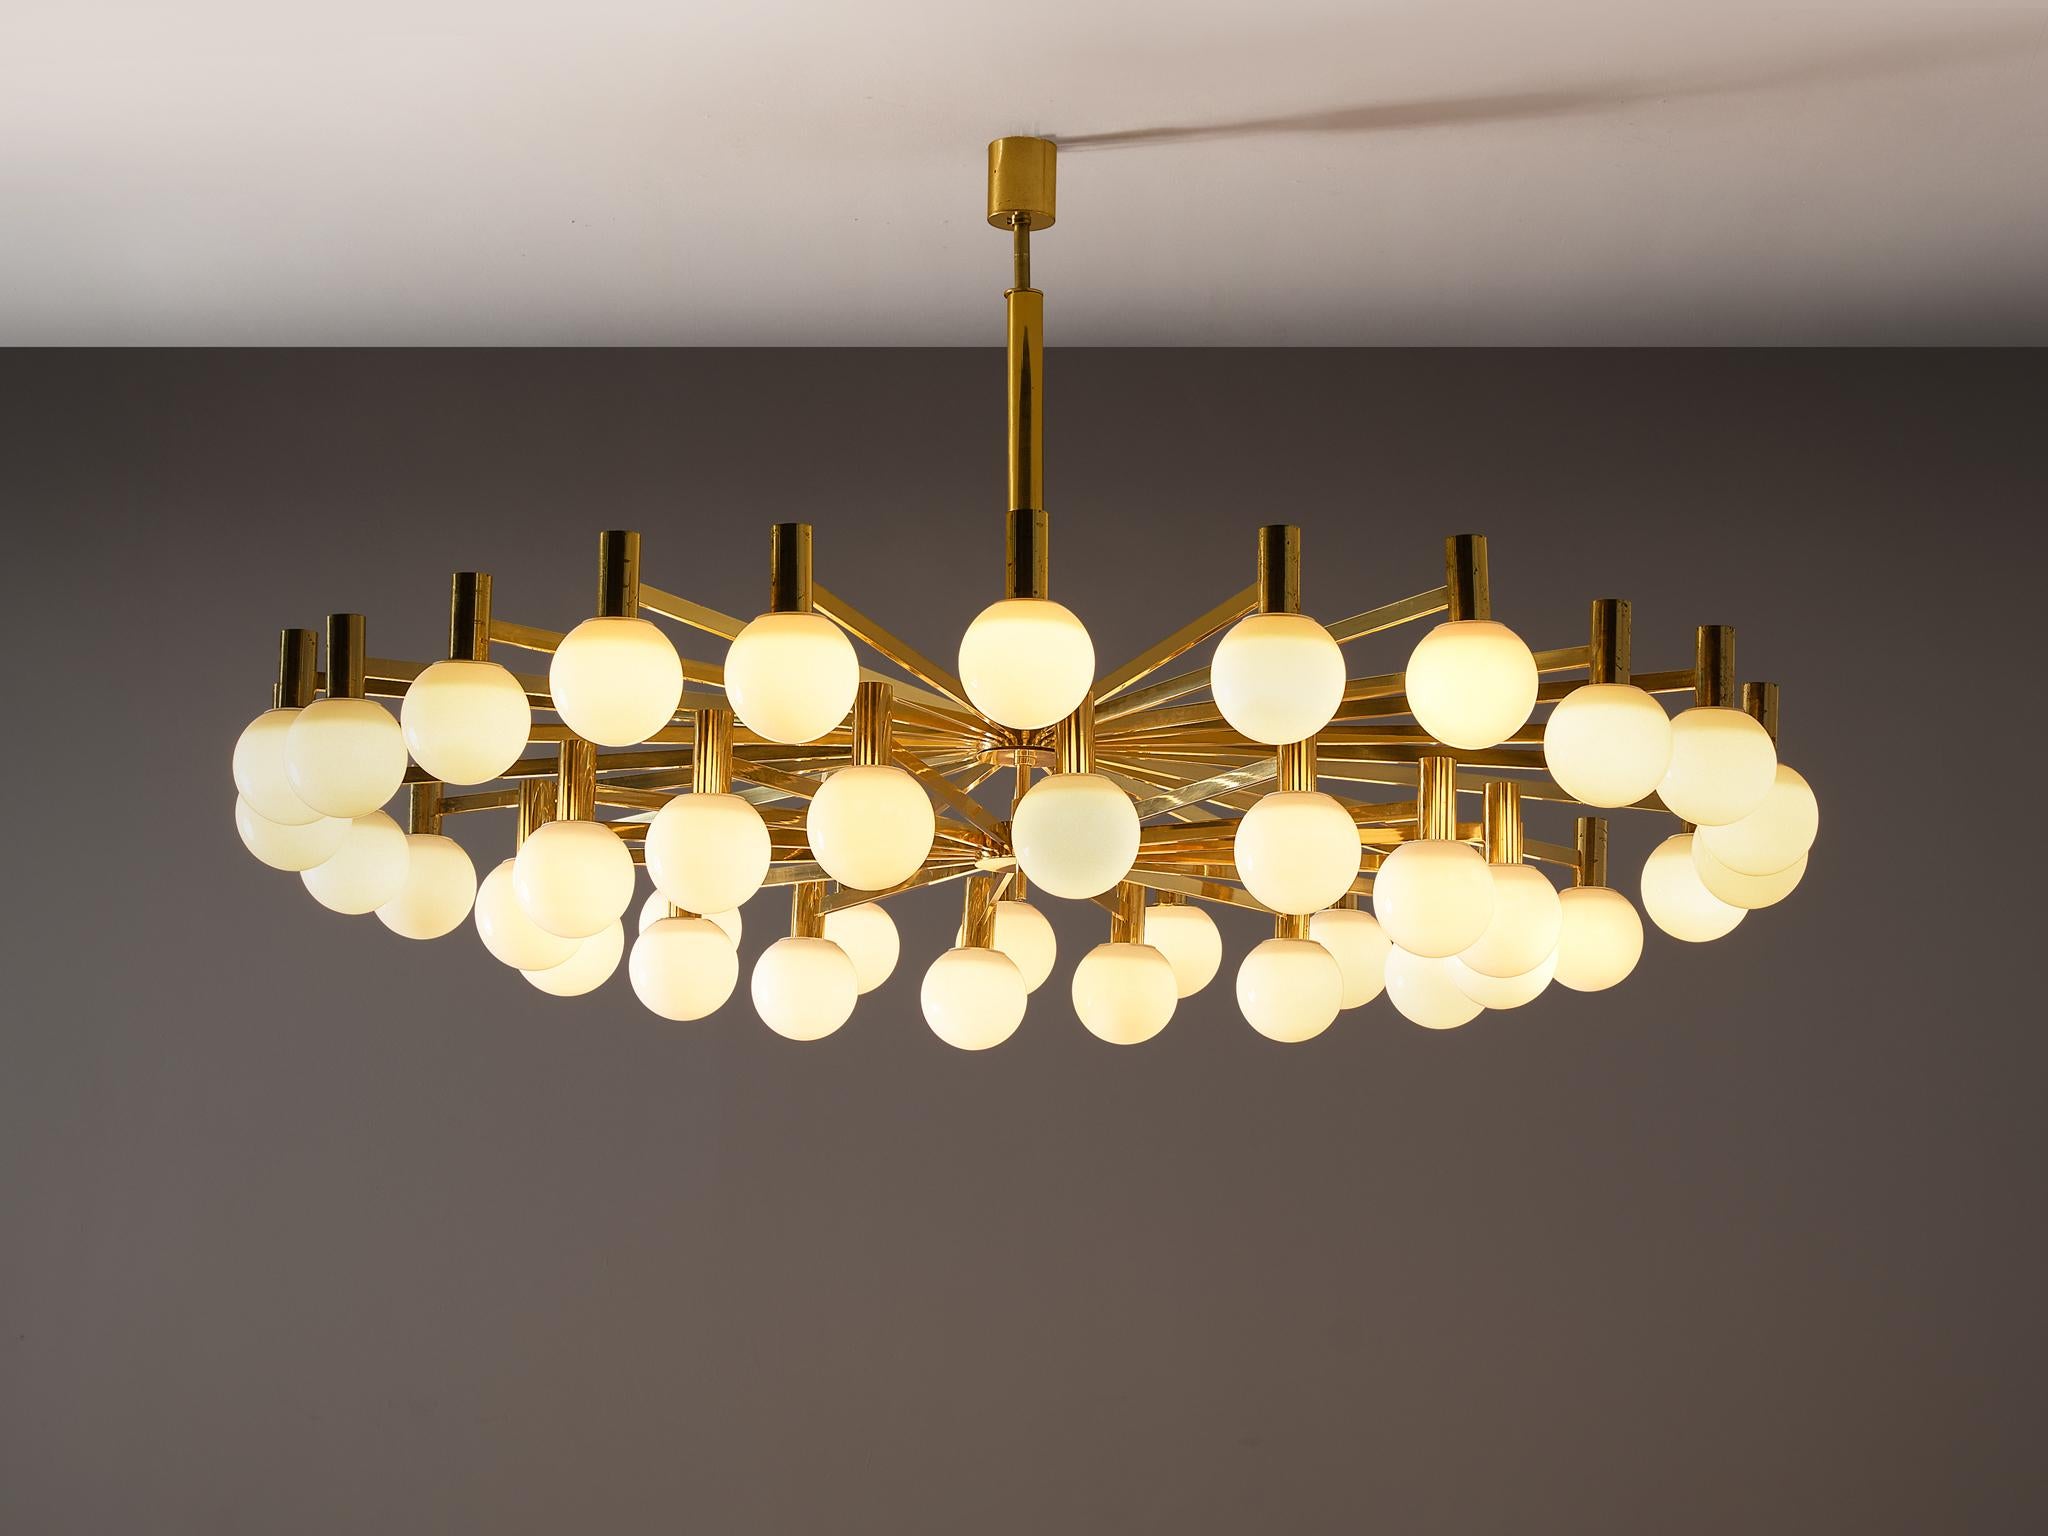 Chandelier, brass, milk glass, Europe, 1970s.

Embark upon a journey to the illustrious 1970s in Europe, where craftsmanship met opulence in the creation of a stunning chandelier. This remarkably large and illuming fixture displays grace and luxury.